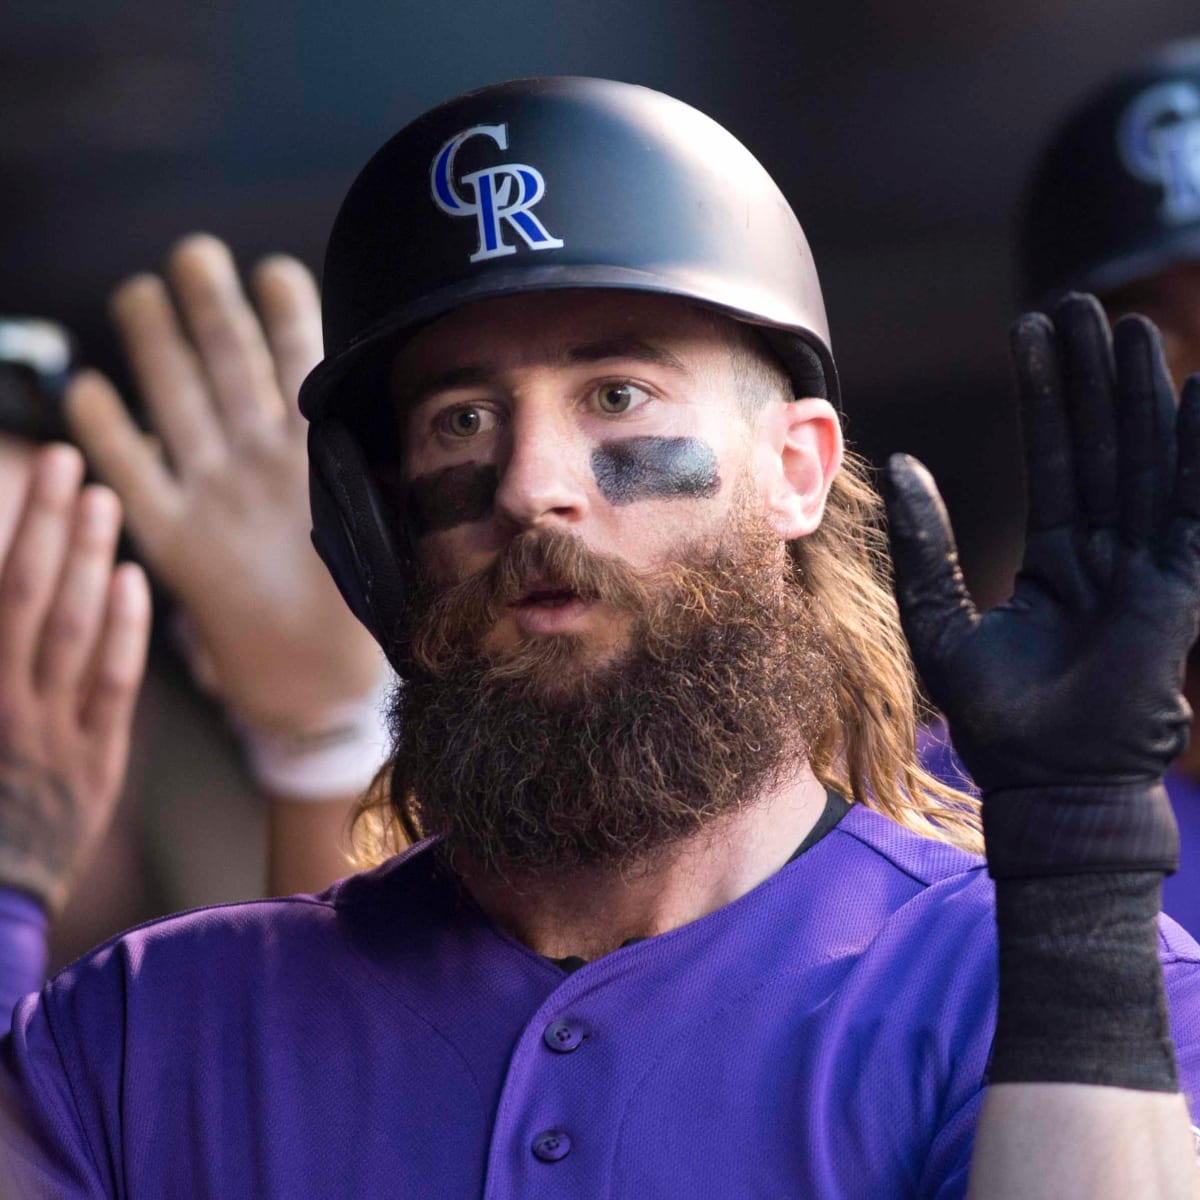 Charlie Blackmon signs one-year contract extension with Rockies